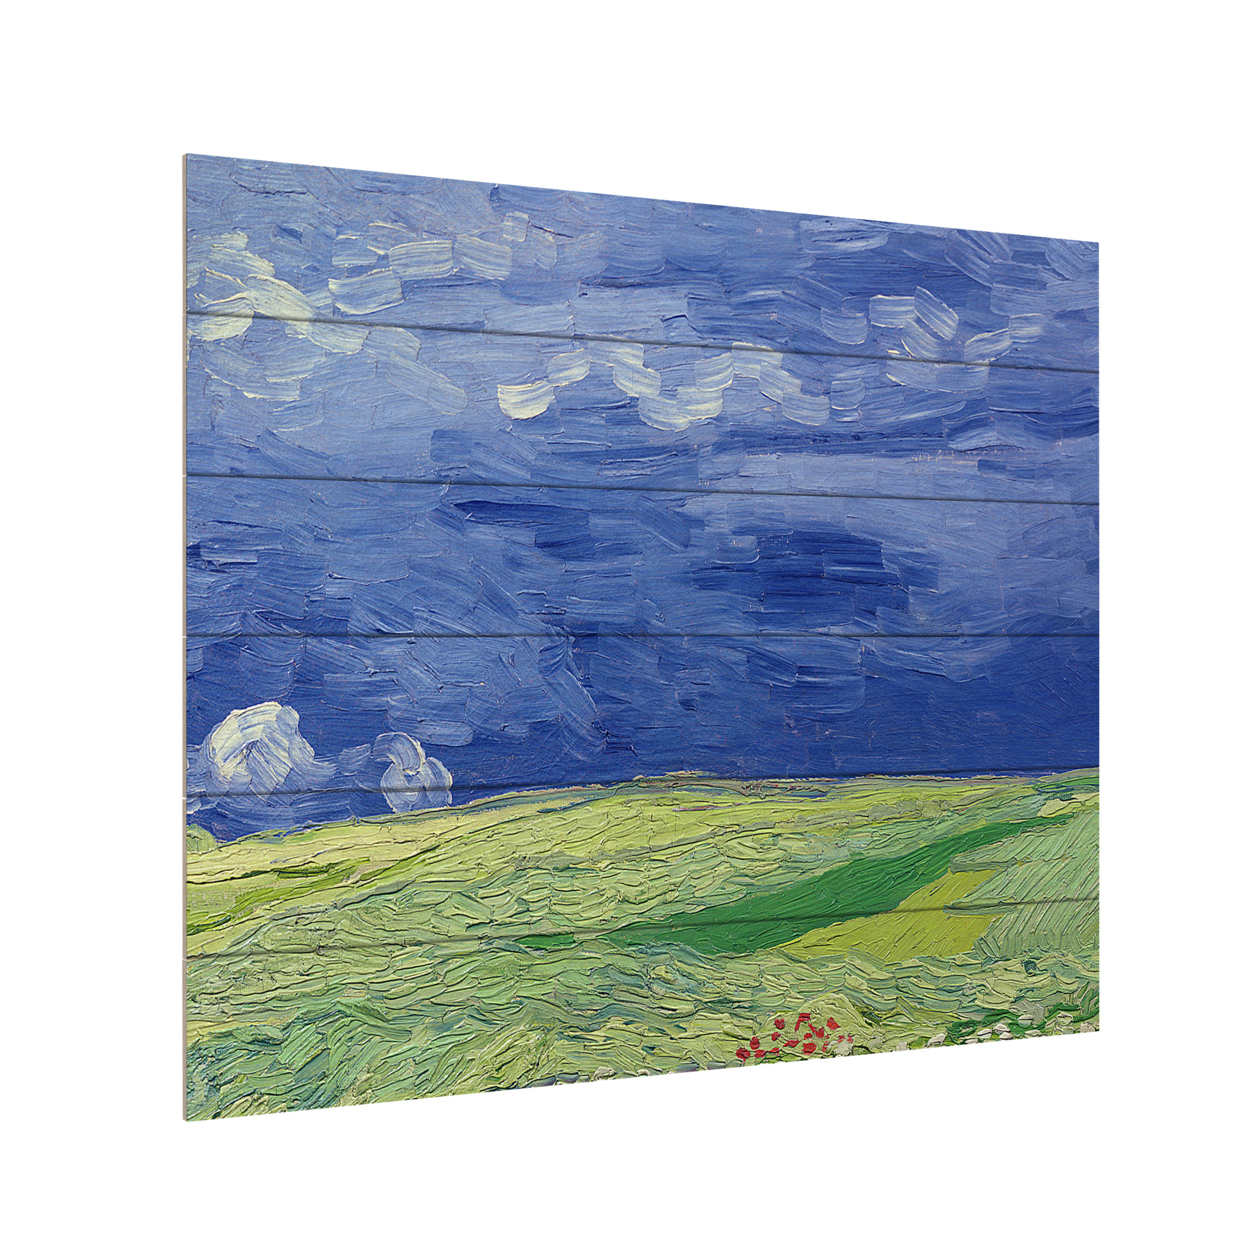 Wooden Slat Art 18 X 22 Inches Titled Wheatfields Under Thnderclouds Ready To Hang Home Decor Picture